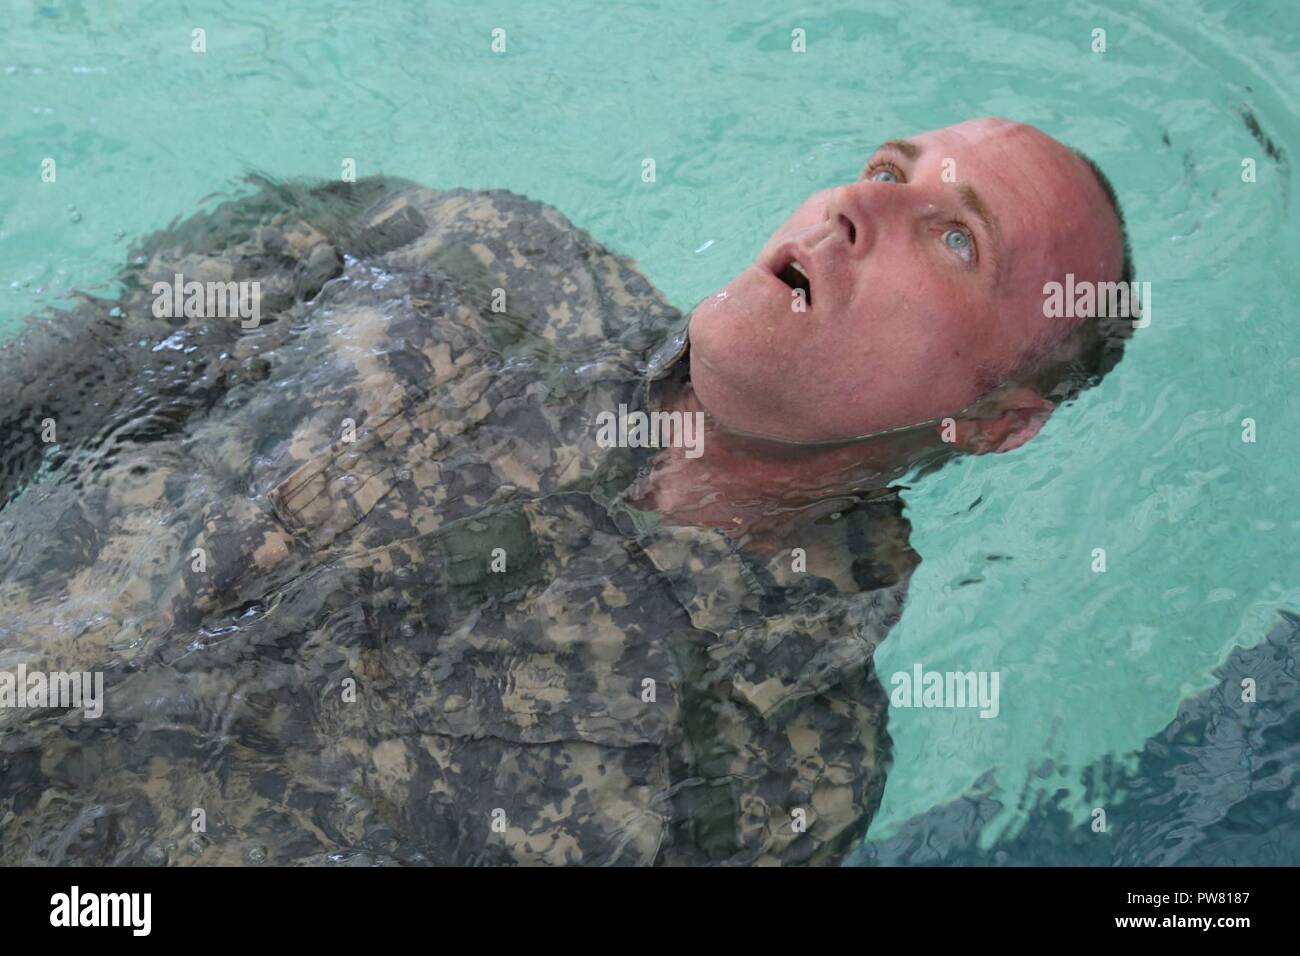 U.S. Army Staff Sgt. Eric Sullivan, assigned to the Blanchfield Army Community Hospital, swims backwards during the water survival portion of the 2017 Best Medic Competition at Fort Bragg, N.C., Sept. 19, 2017. The competition tested the physical and mental toughness, as well as the technical competence, of each medic to identify the team moving forward to represent the region at the next level of the competition. Stock Photo